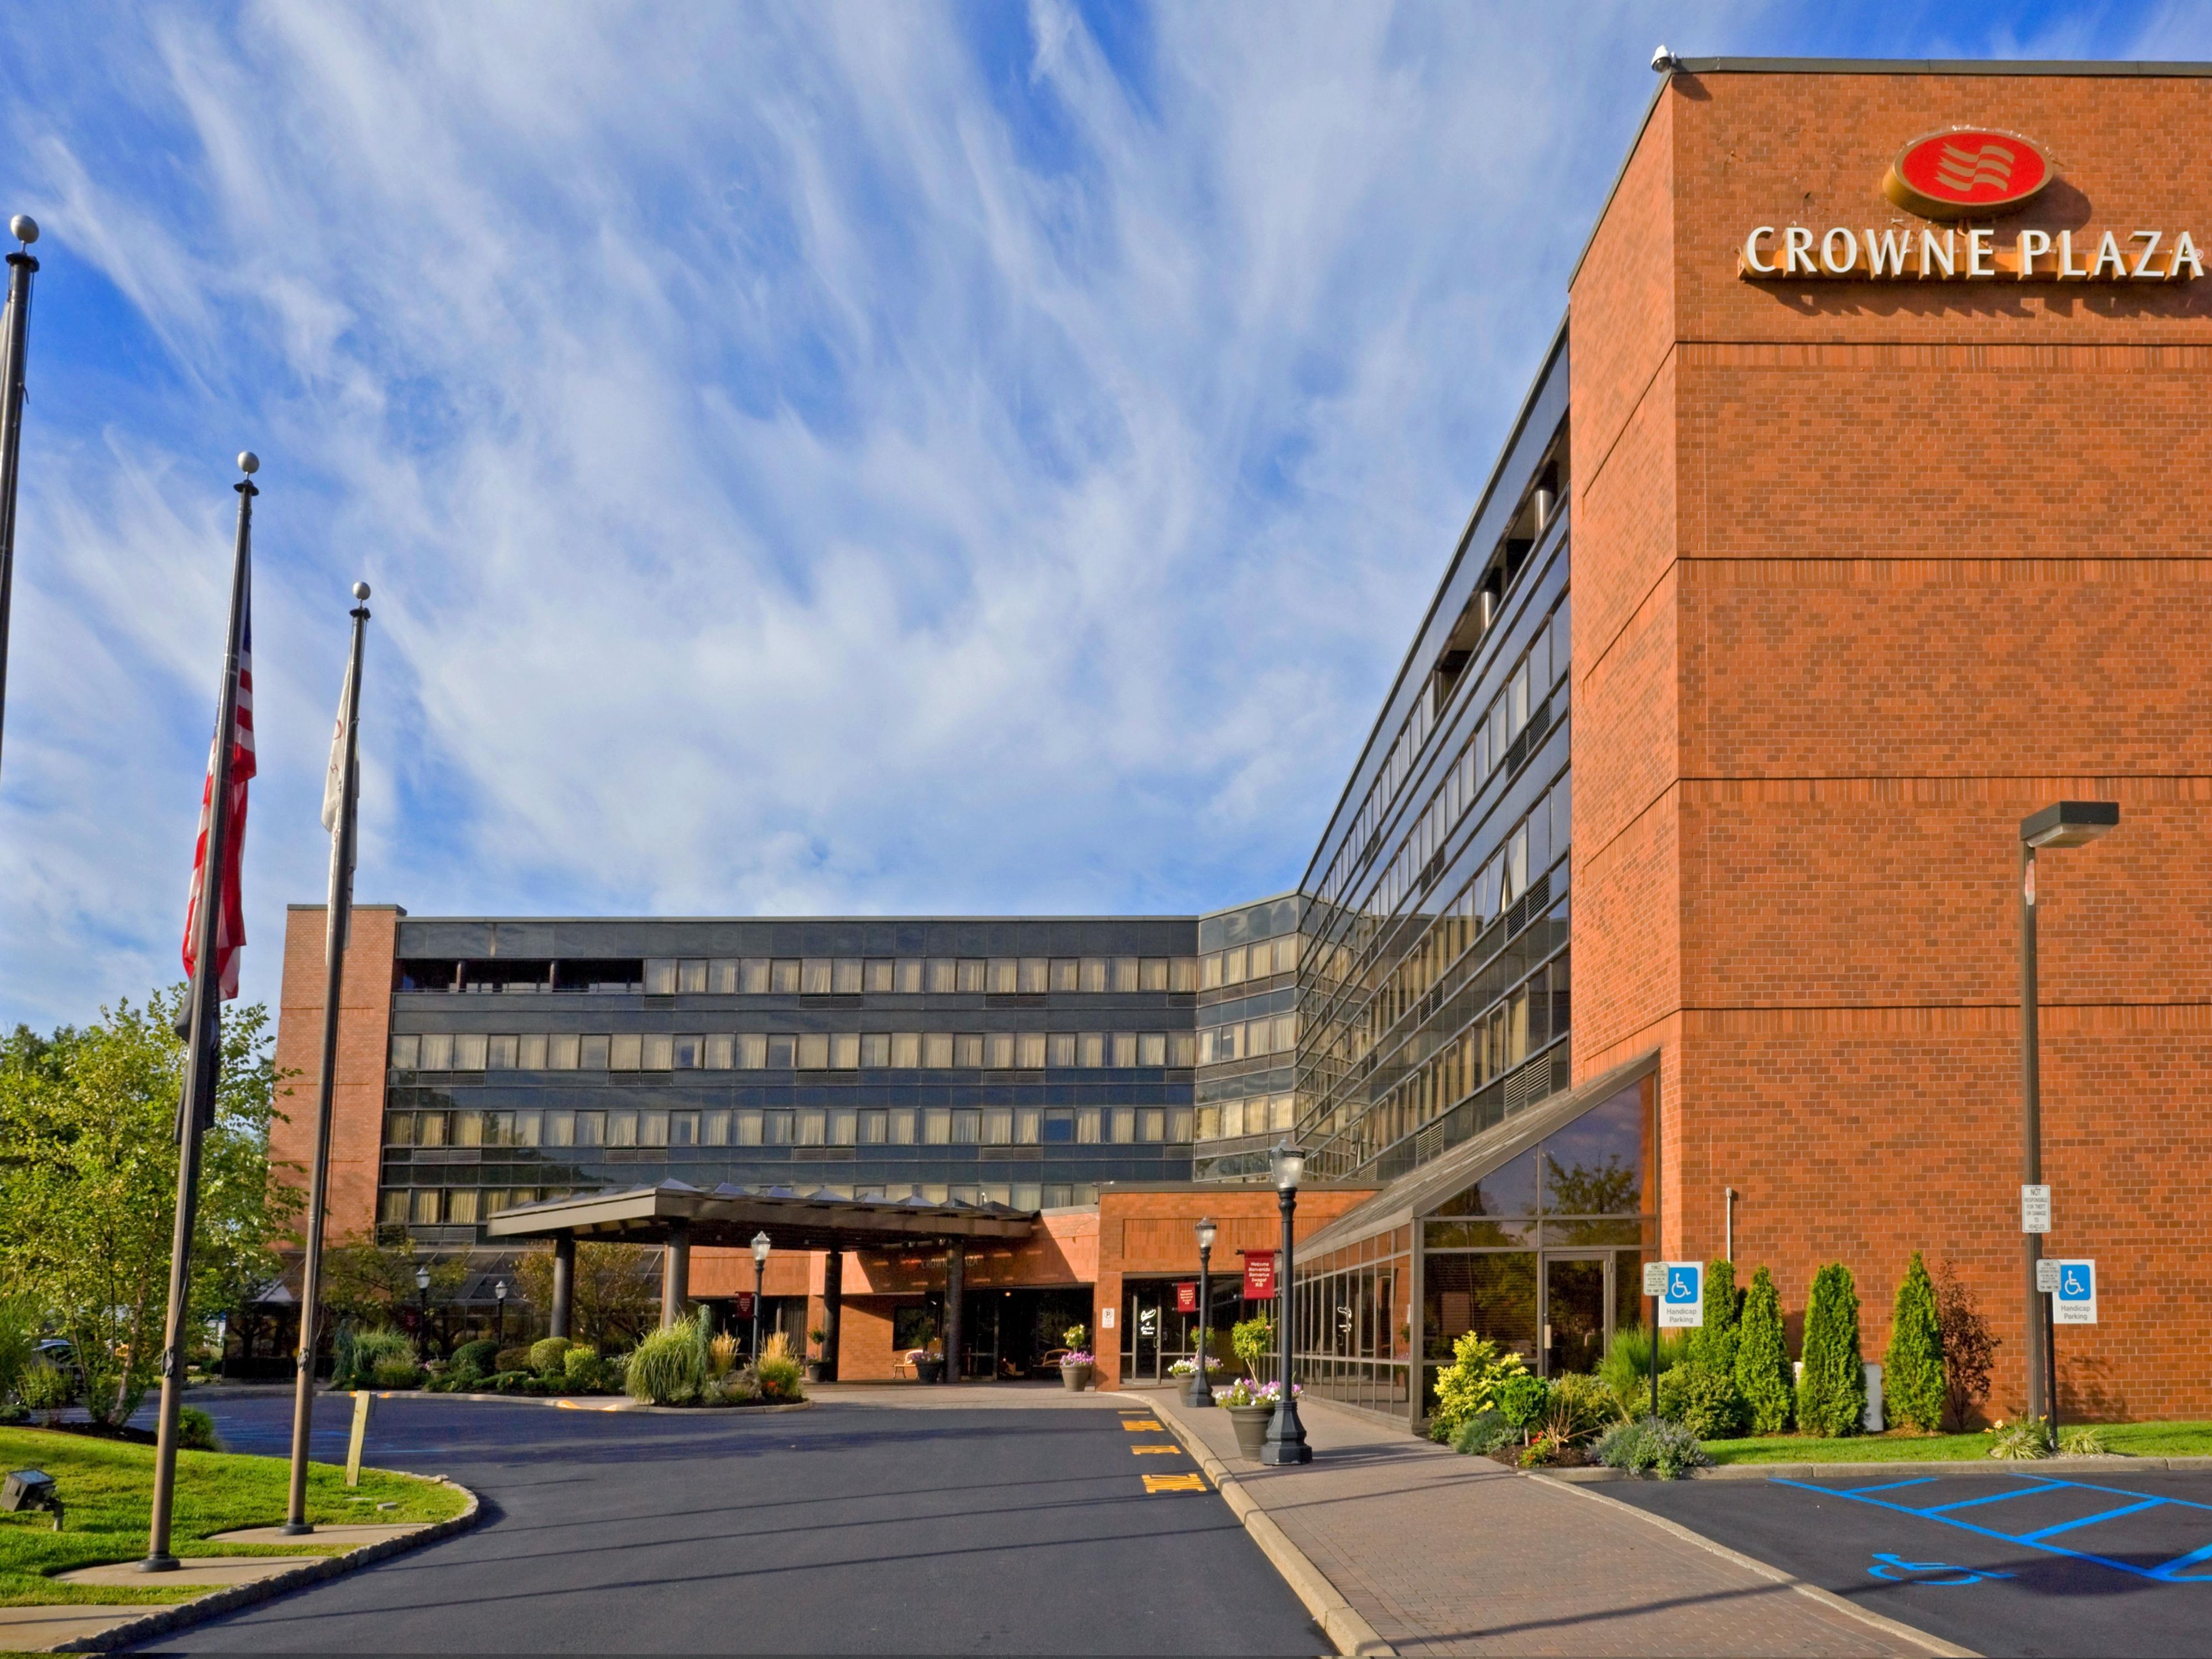 Our central location puts you at the heart of it all. Spend the day at the Jersey shore, tour Rutgers University, or visit the famed New Jersey Convention and Exposition Center. It’s all right here! 